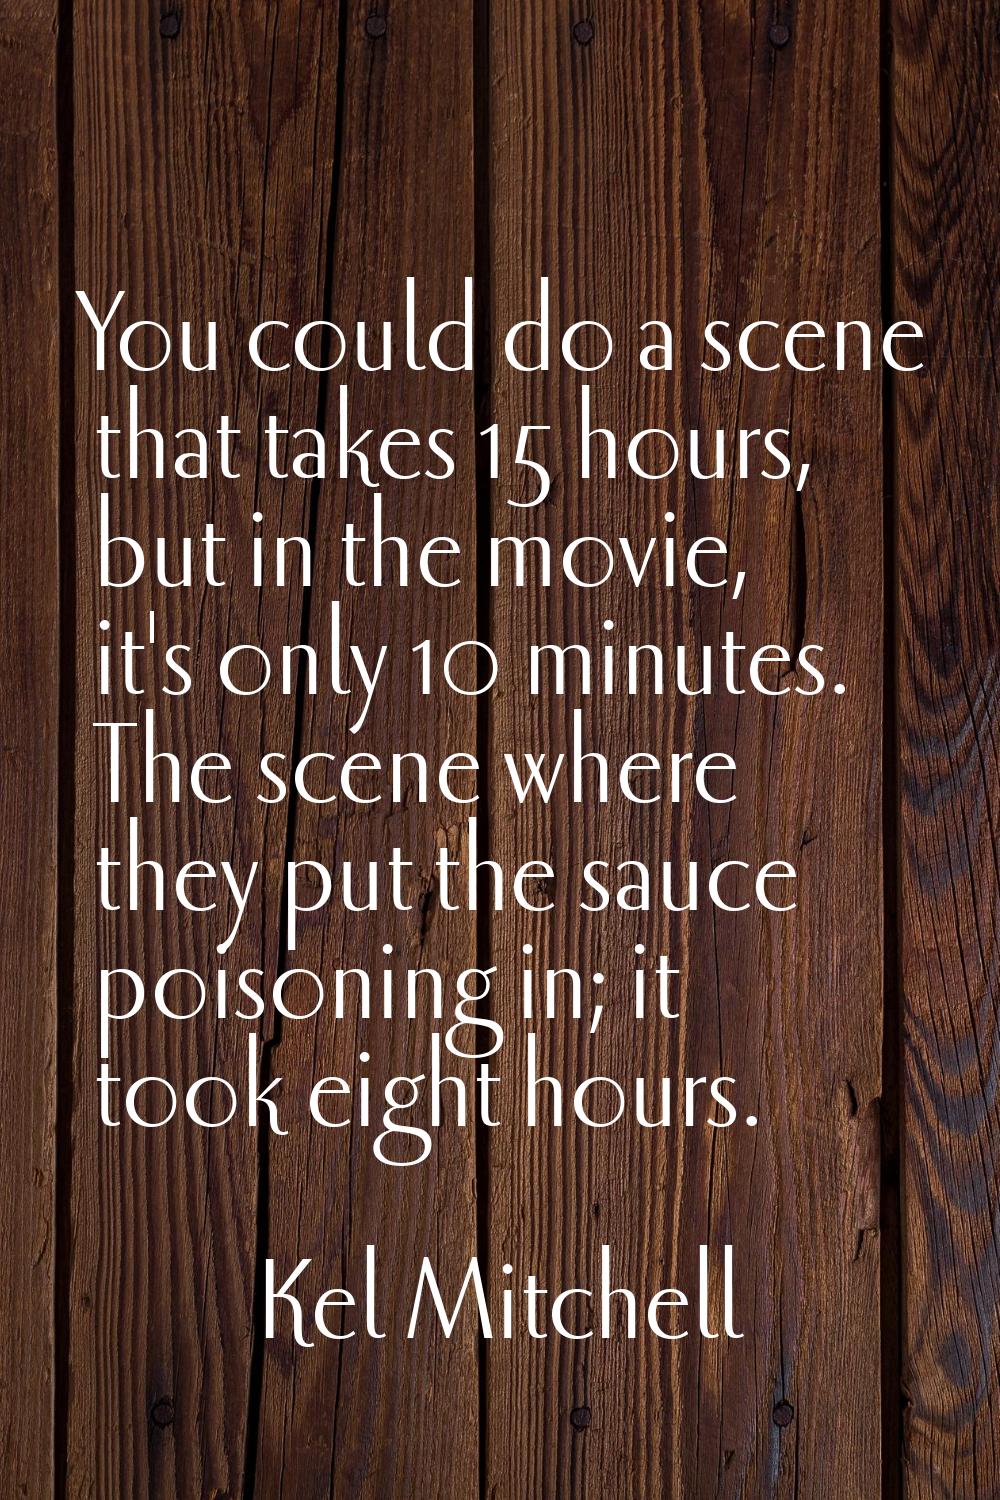 You could do a scene that takes 15 hours, but in the movie, it's only 10 minutes. The scene where t